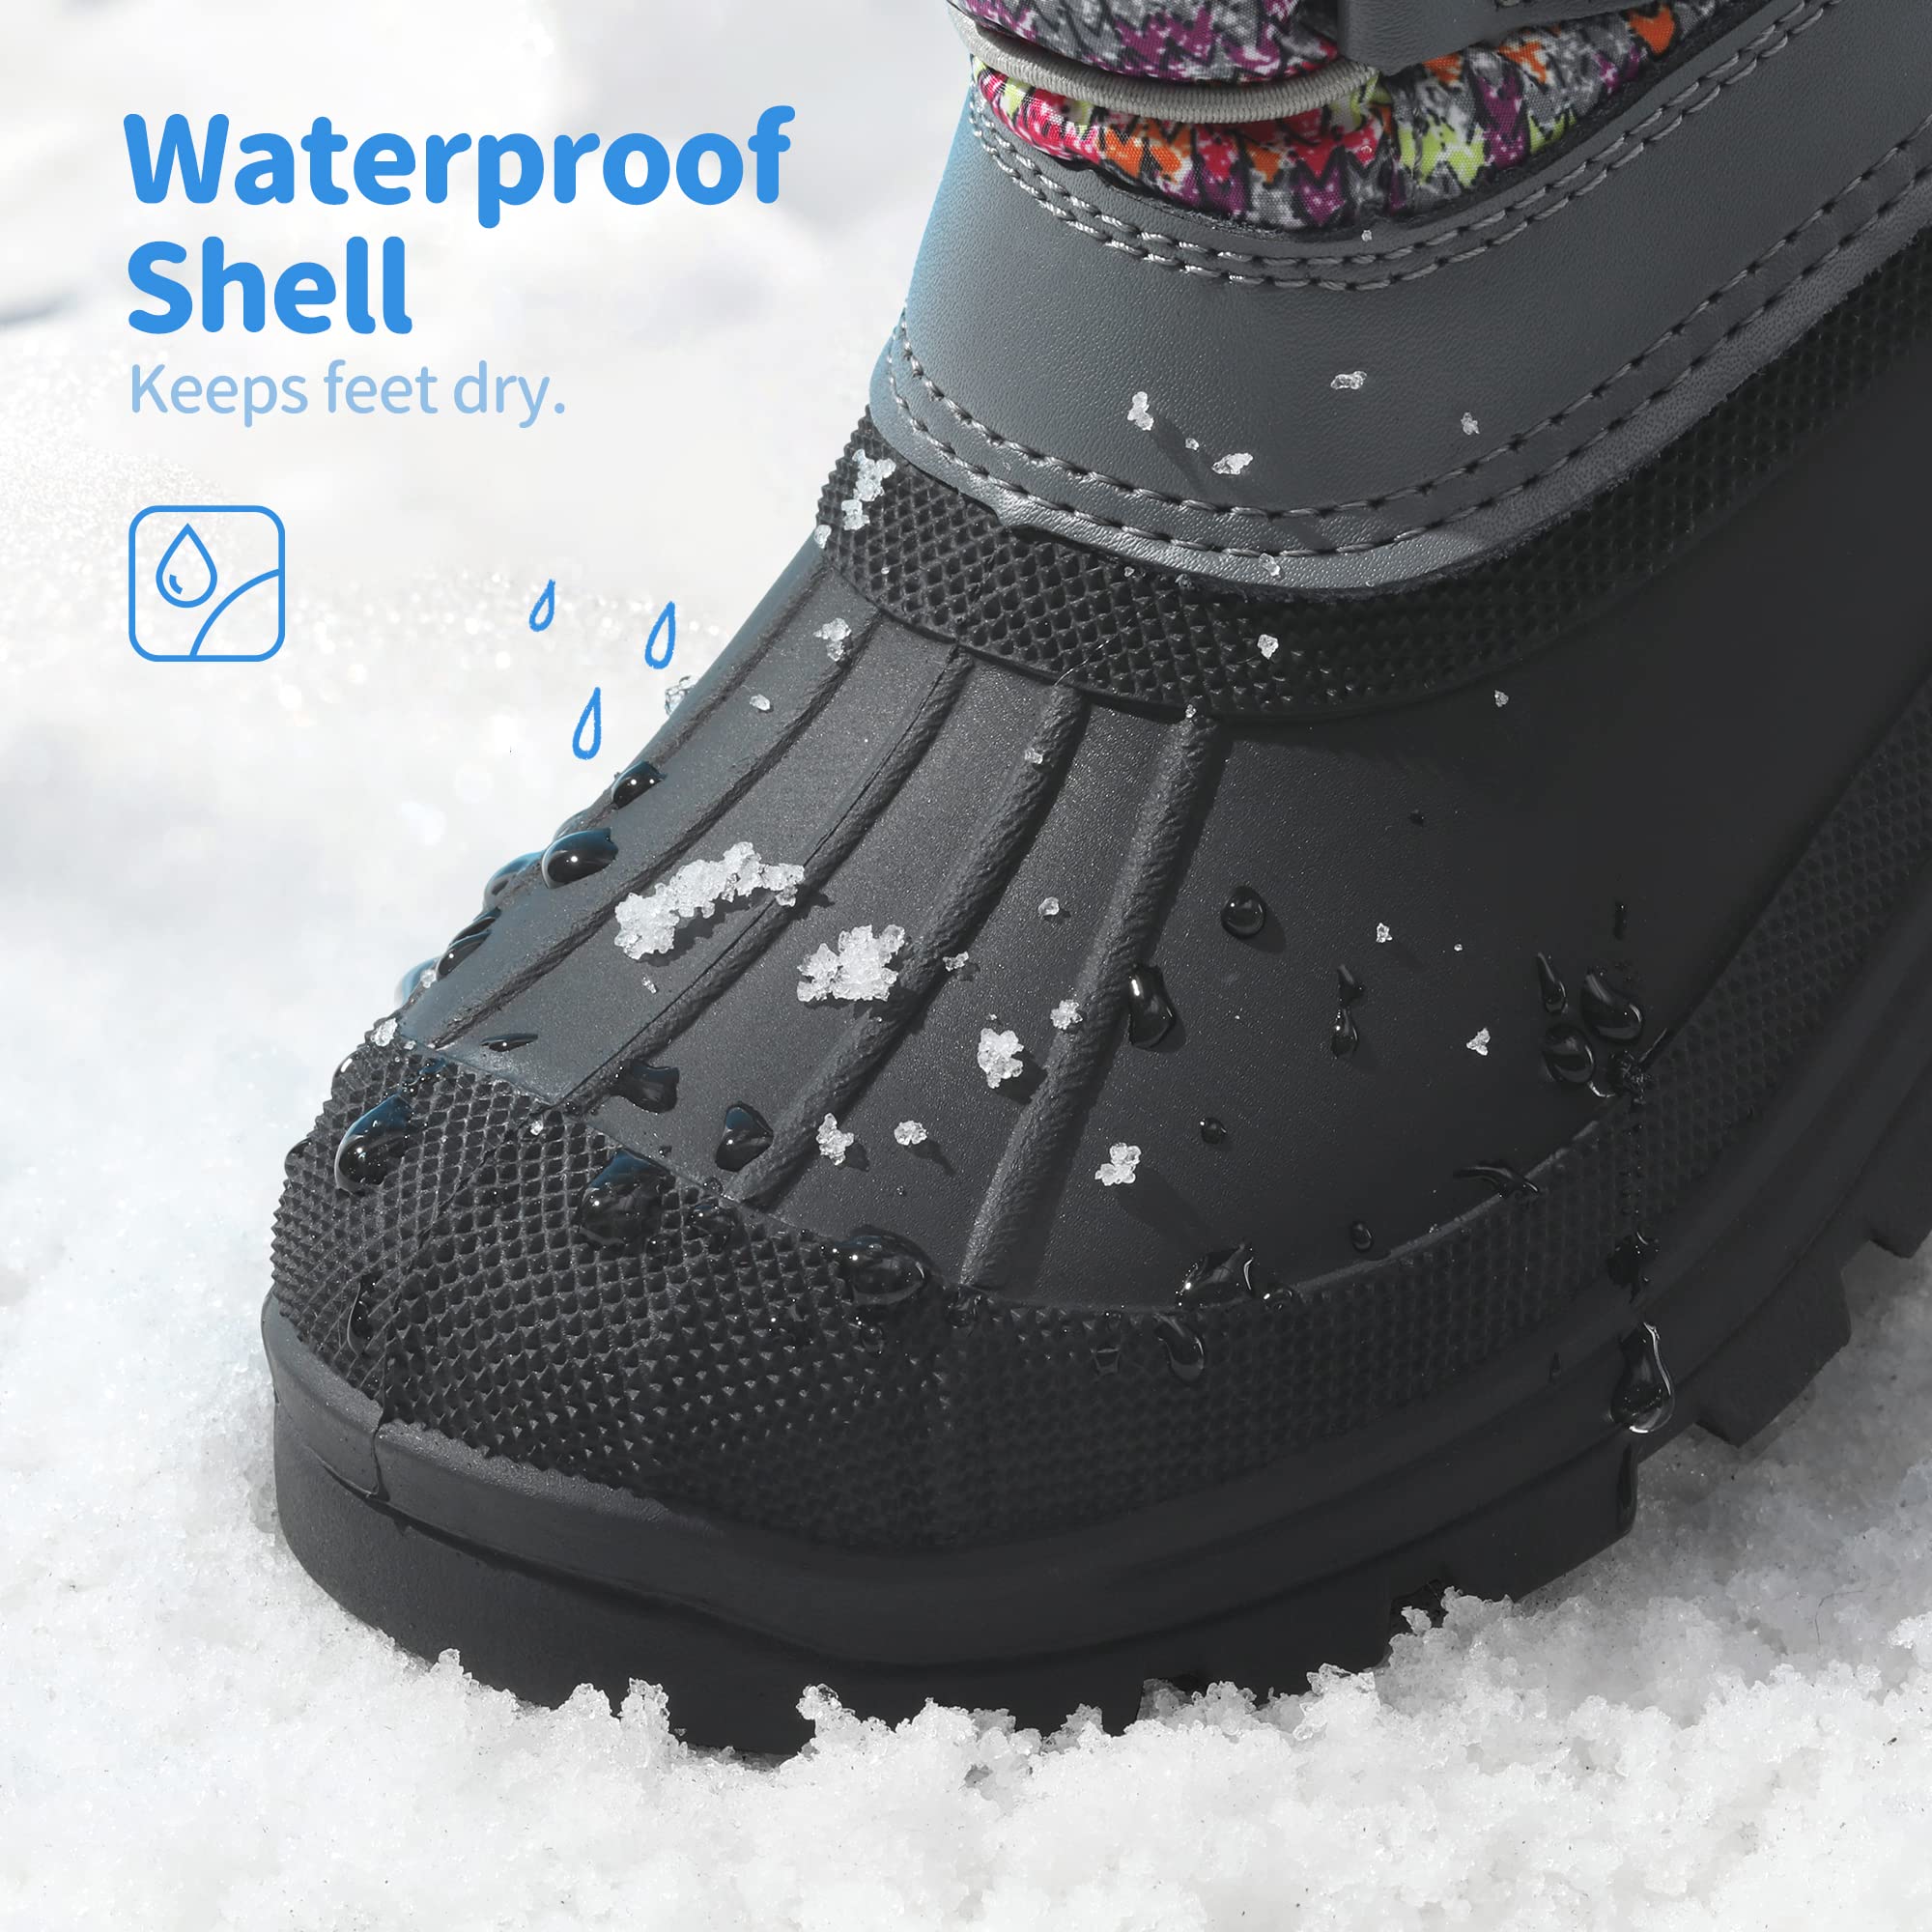 DREAM PAIRS Boys Girls Insulated Waterproof Snow Boots